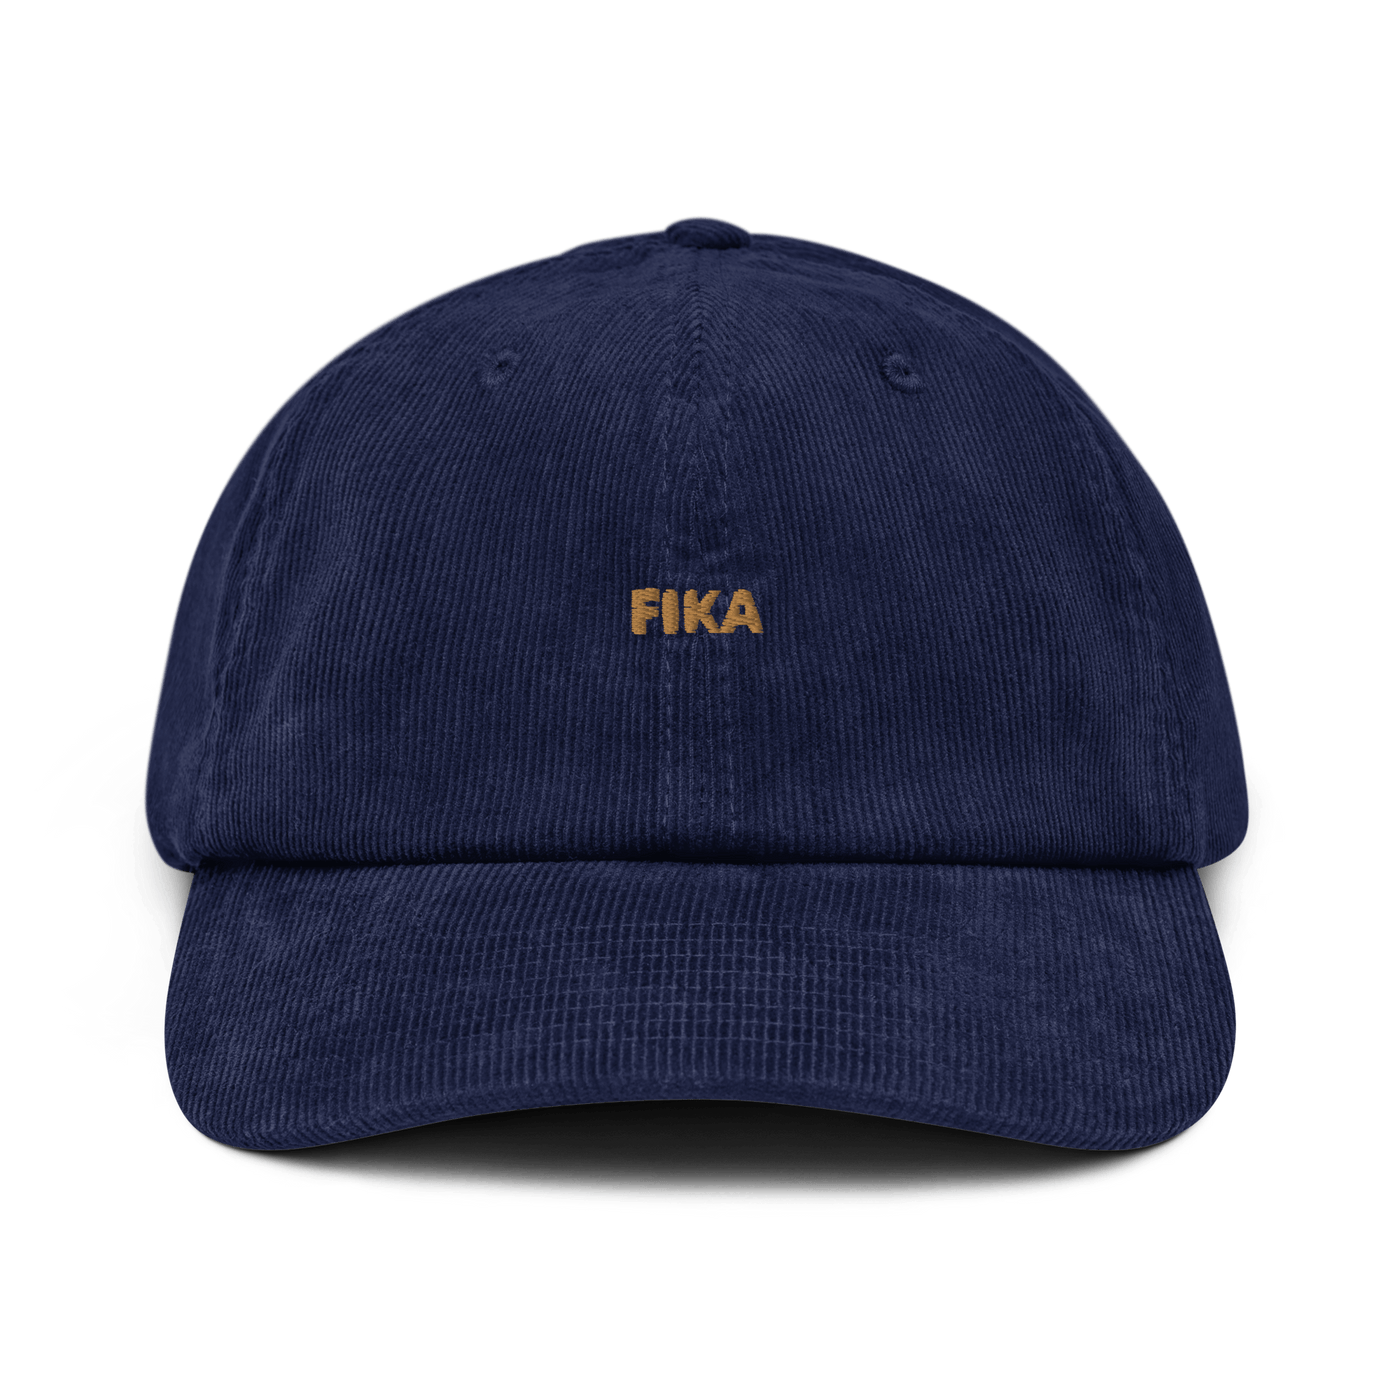 FIKA Corduroy hat - Black - - Just Another Cap Store